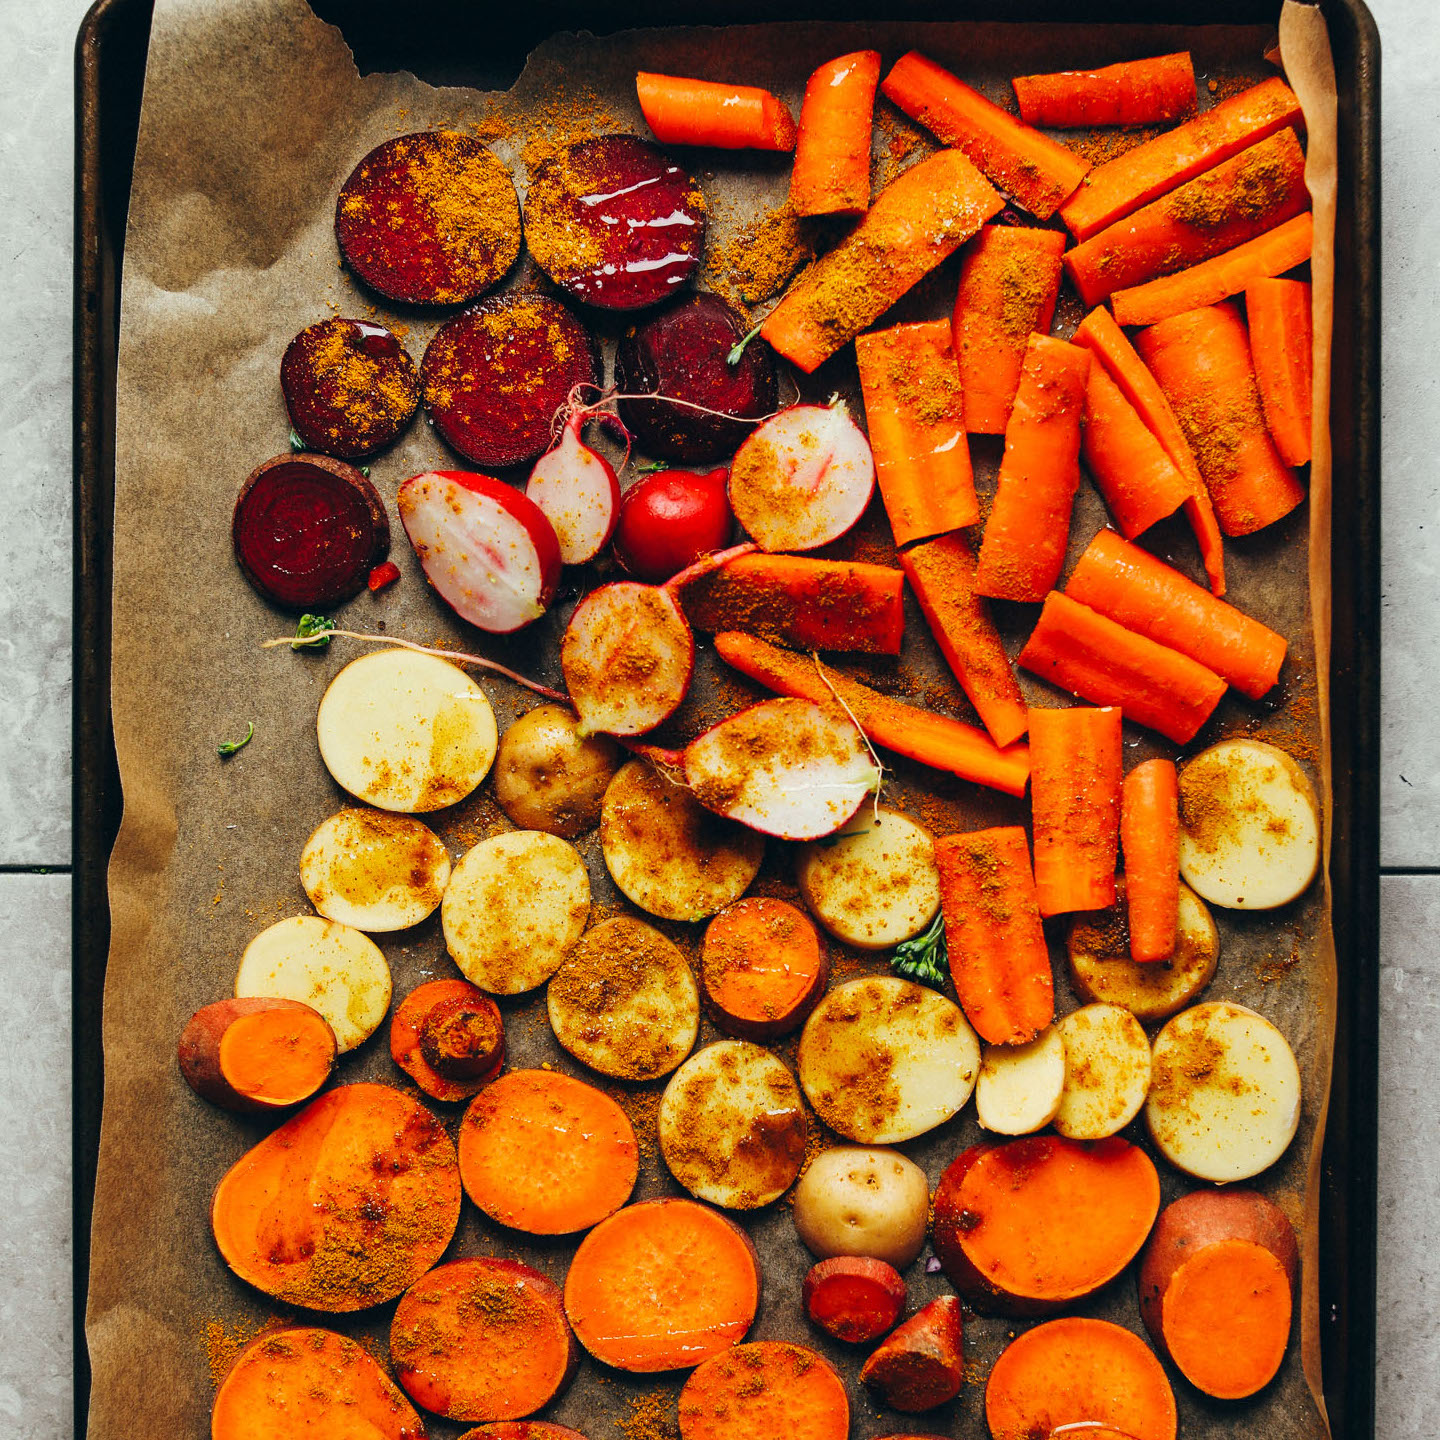 Tray of sliced carrots, beets, radishes, and sweet potatoes for roasting